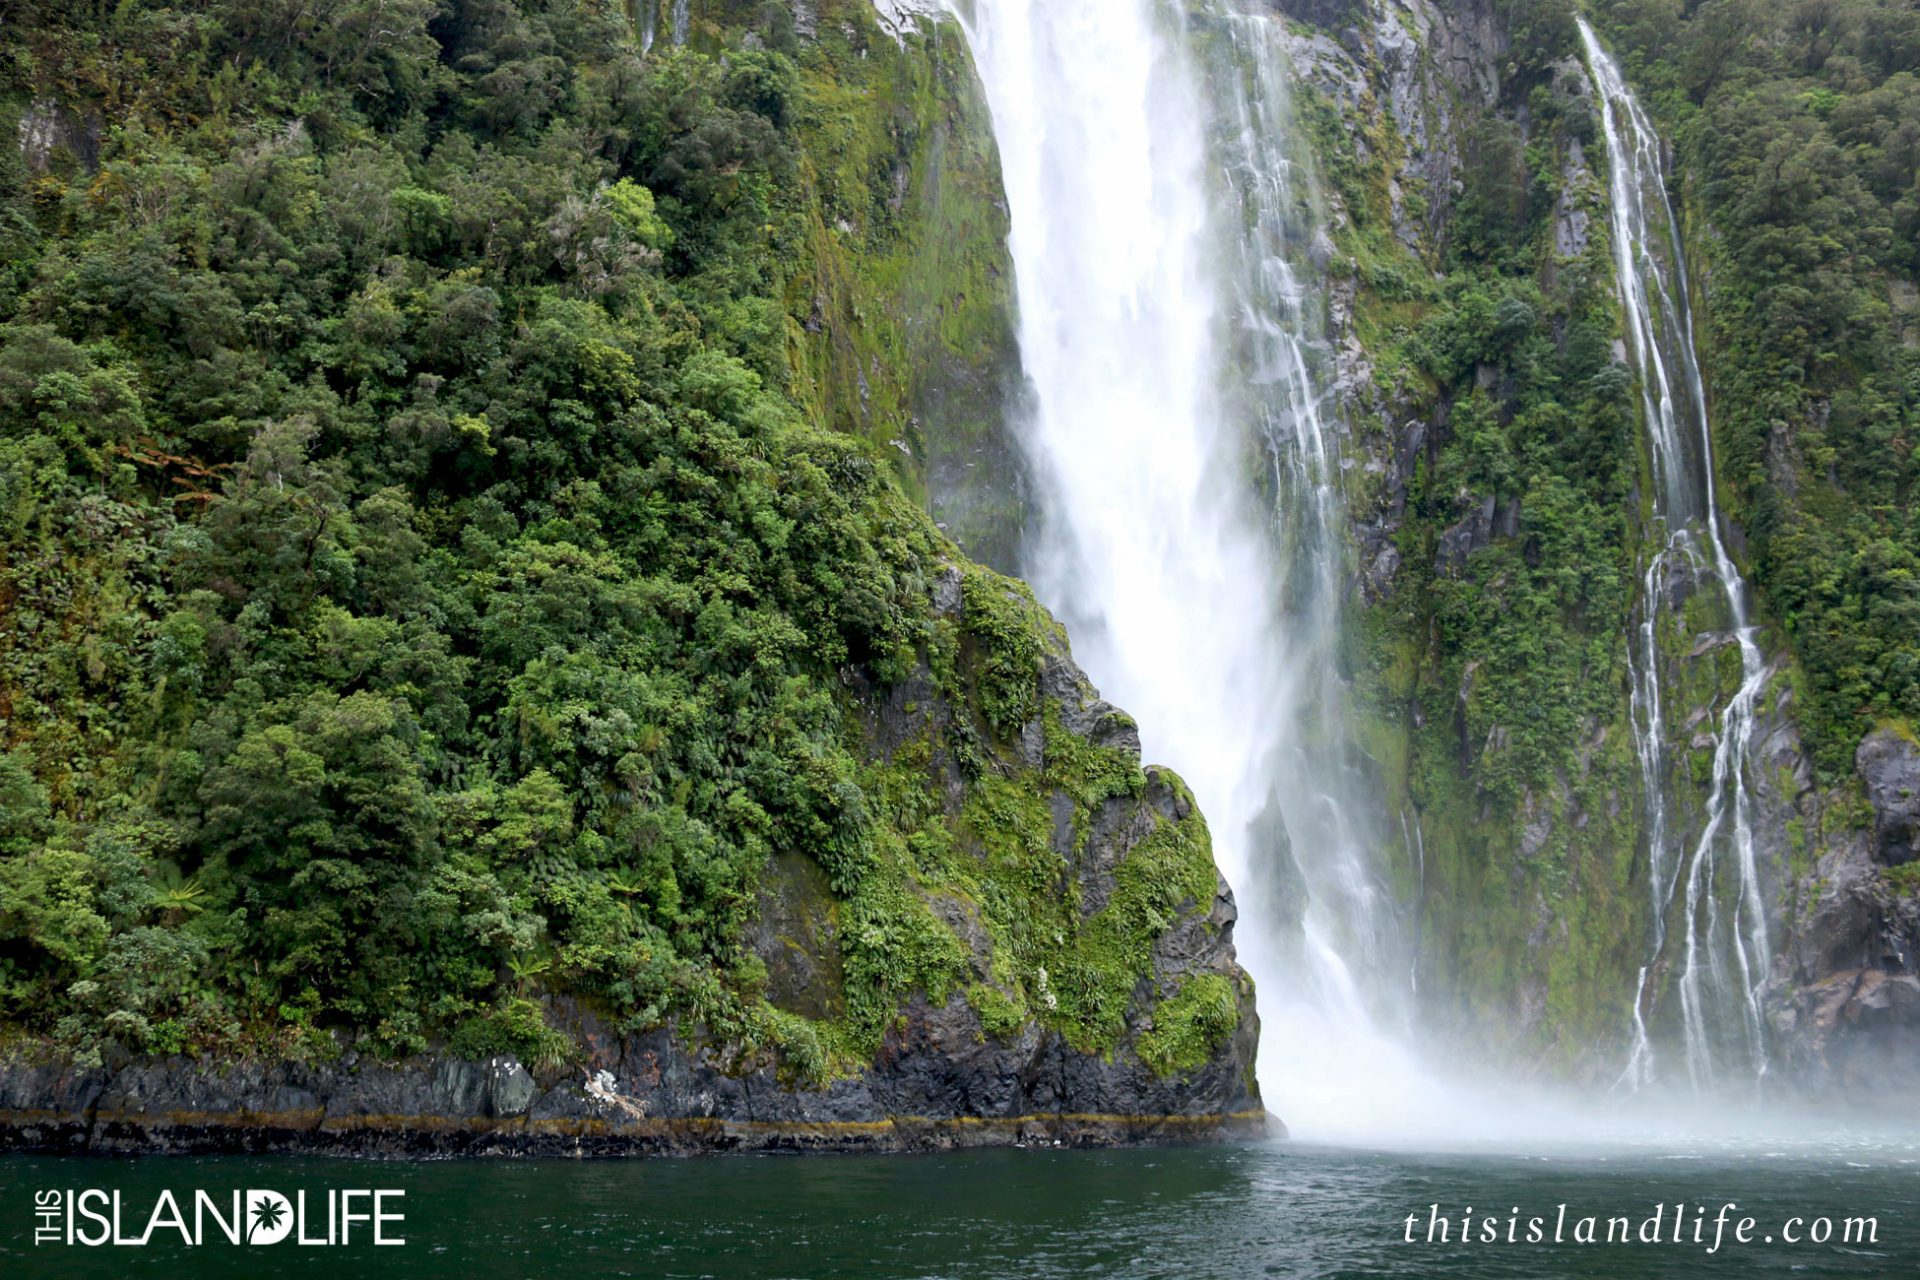 THIS ISLAND LIFE | Milford Sound, New Zealand